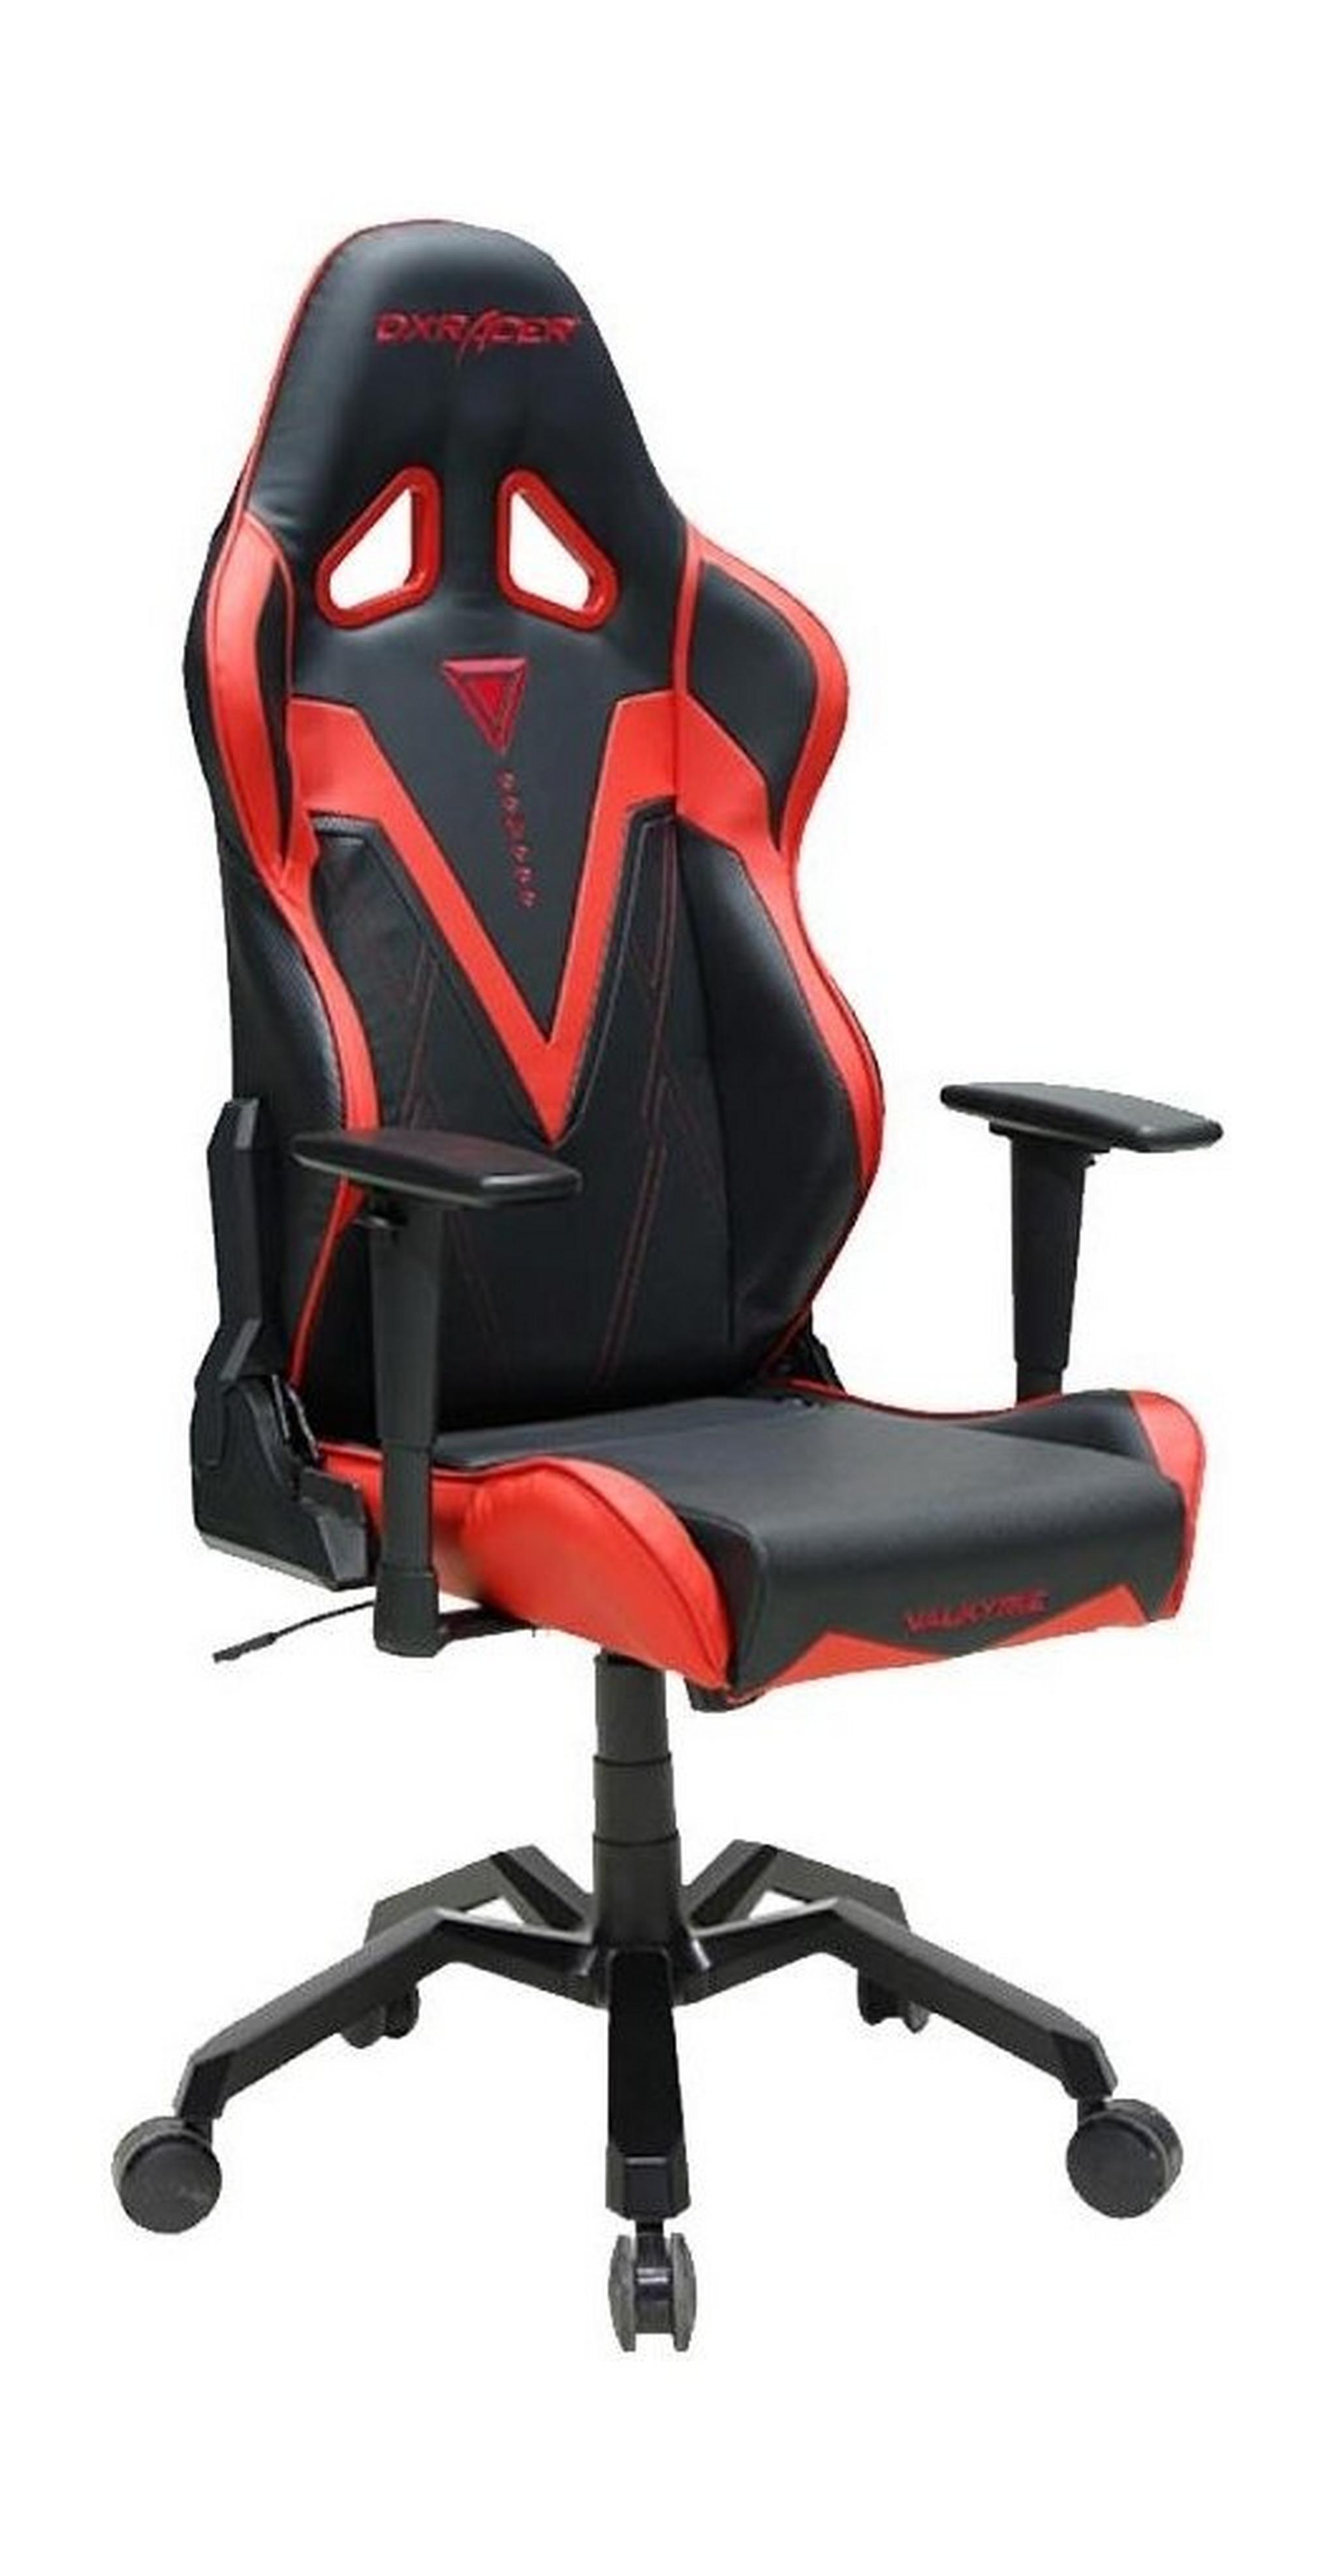 DXRacer Valkyrie Series Gaming Chair - Black Red